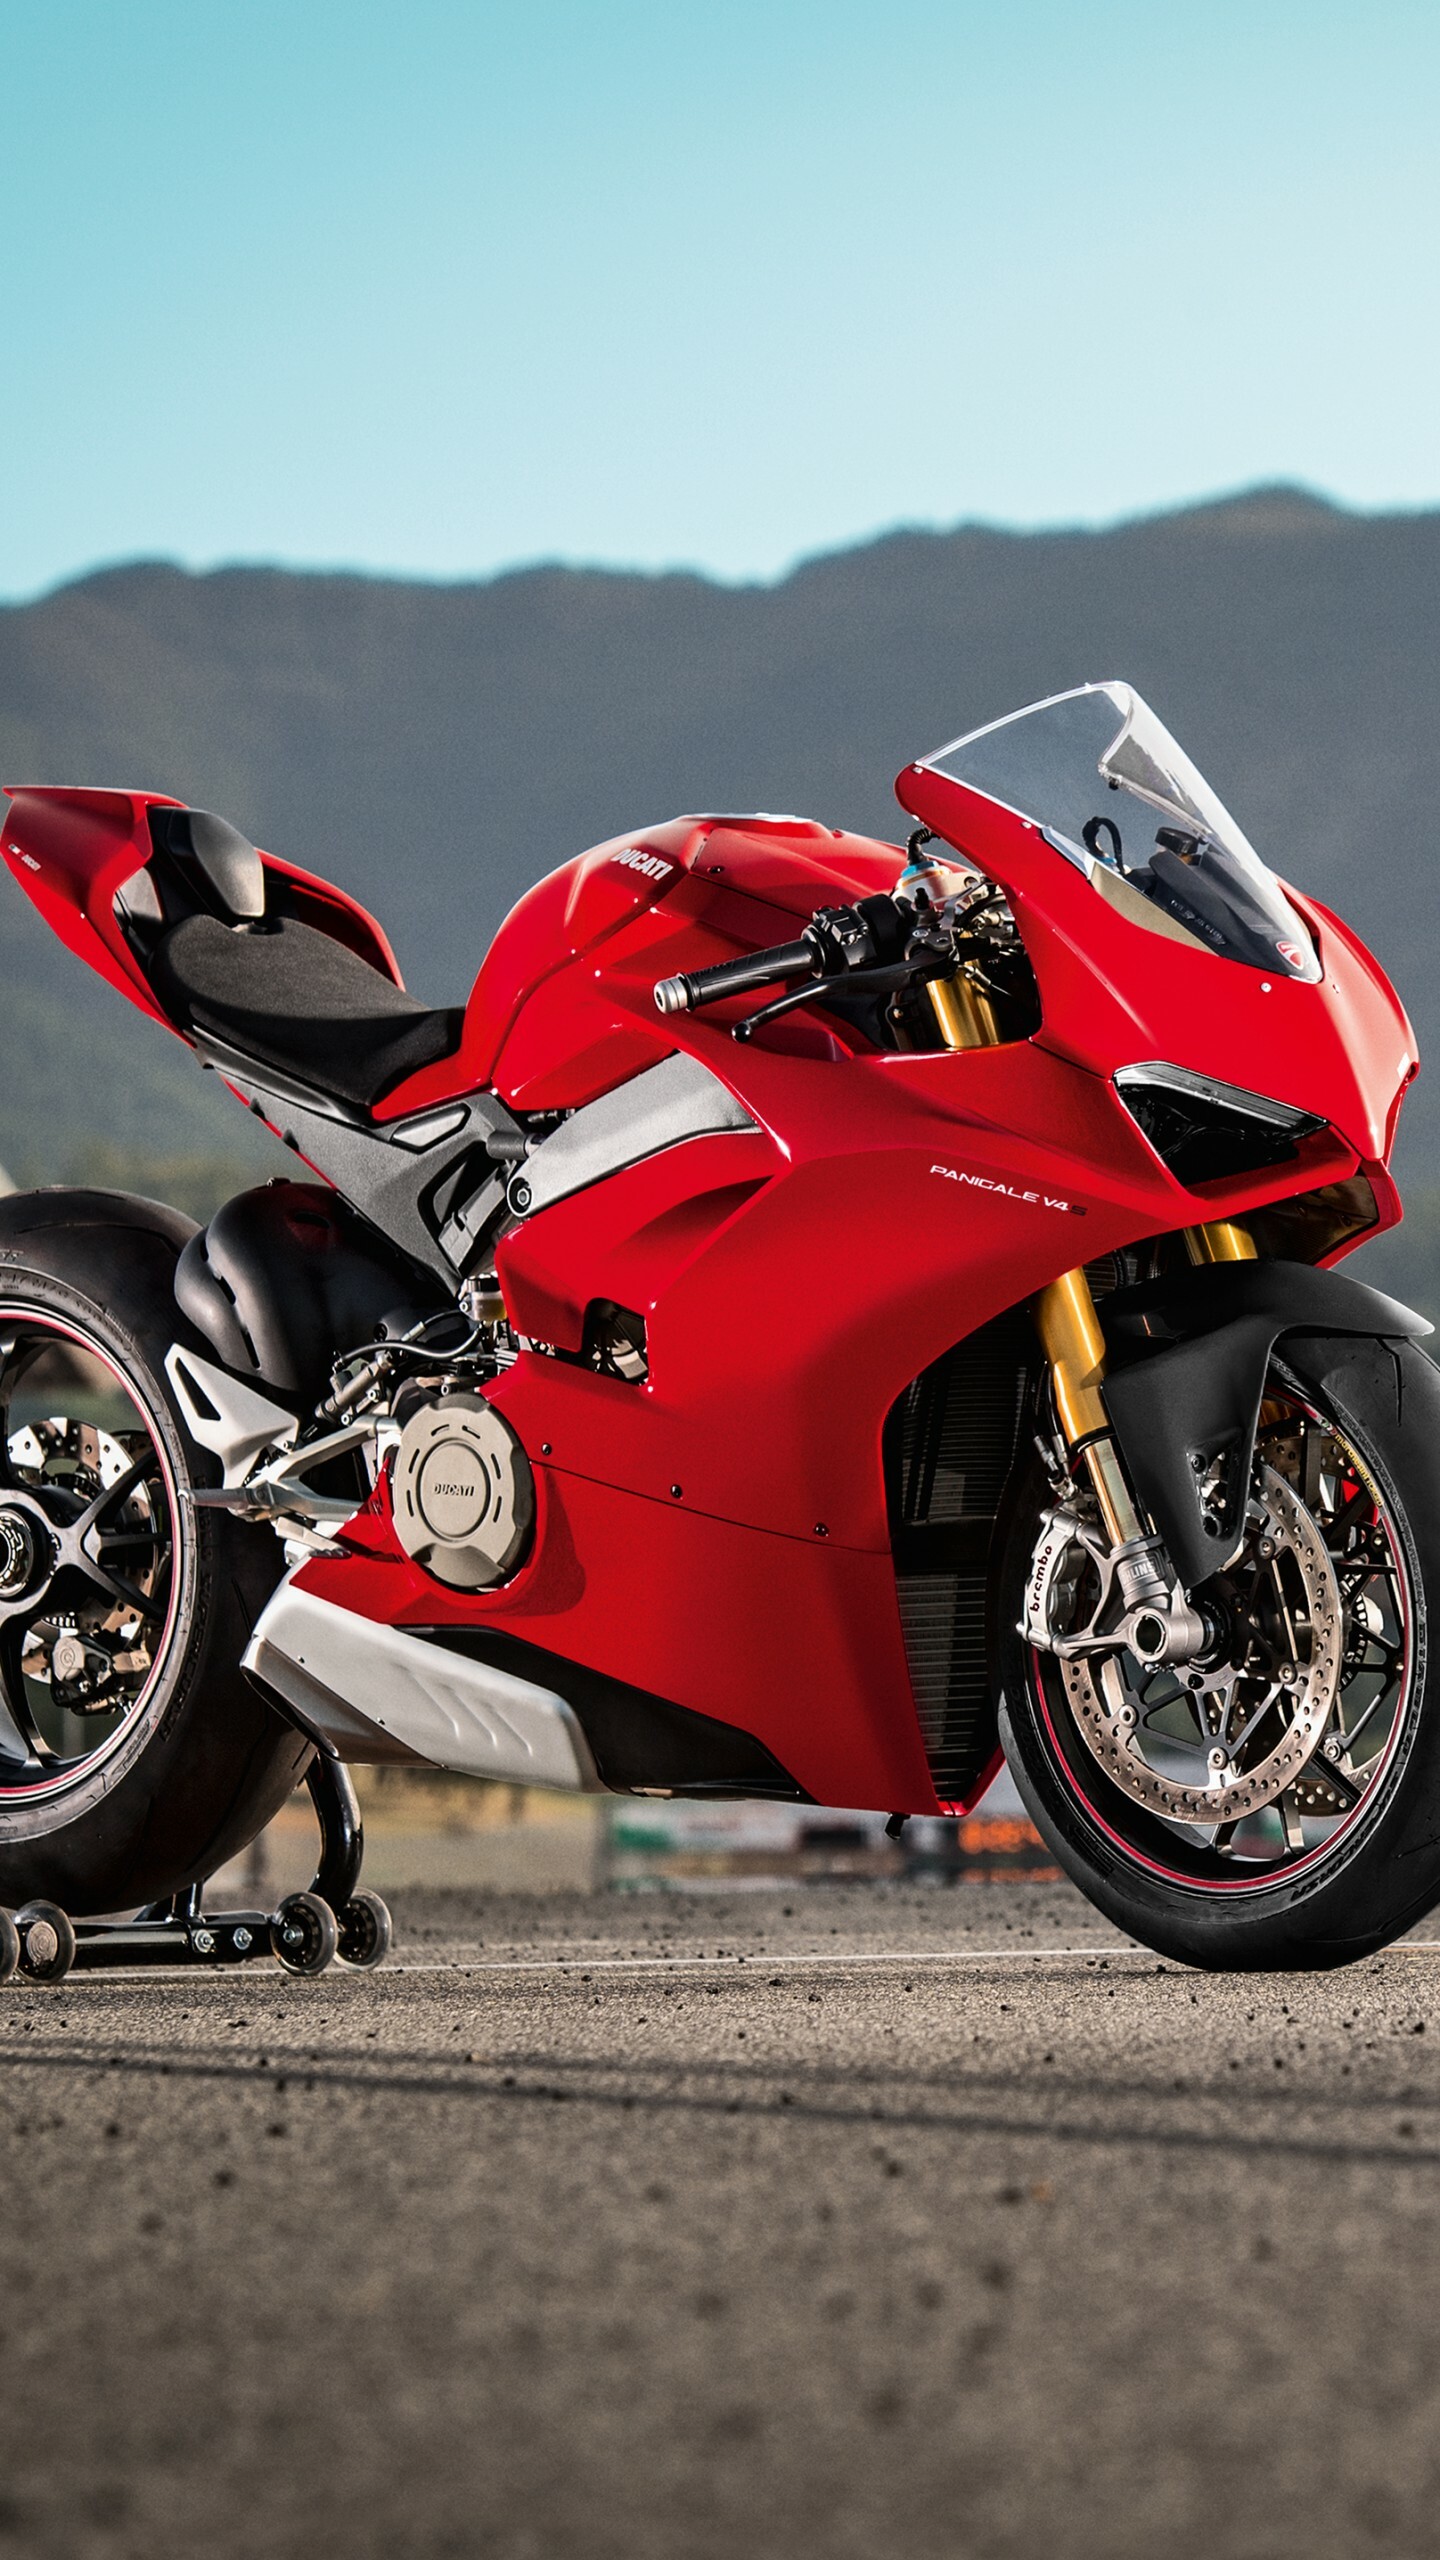 Ducati: Panigale V4 S, 2020 bikes, The company's first large-production street bike with a V4 engine. 1440x2560 HD Background.